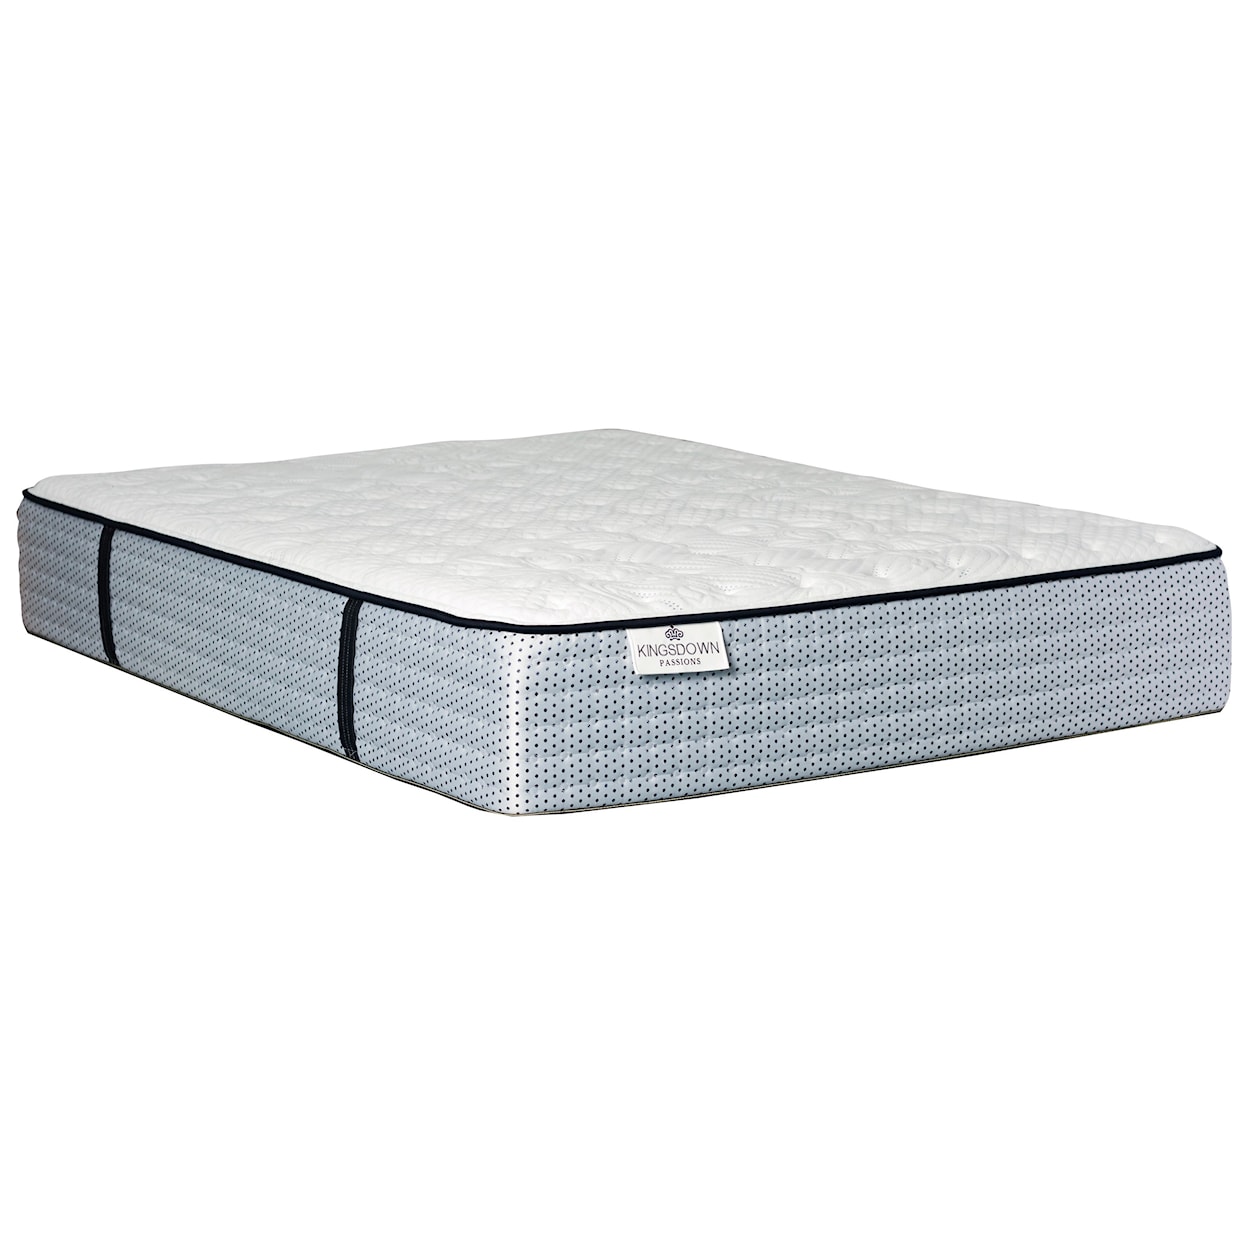 Kingsdown Passions Le Claire TT Queen Pocketed Coil Mattress